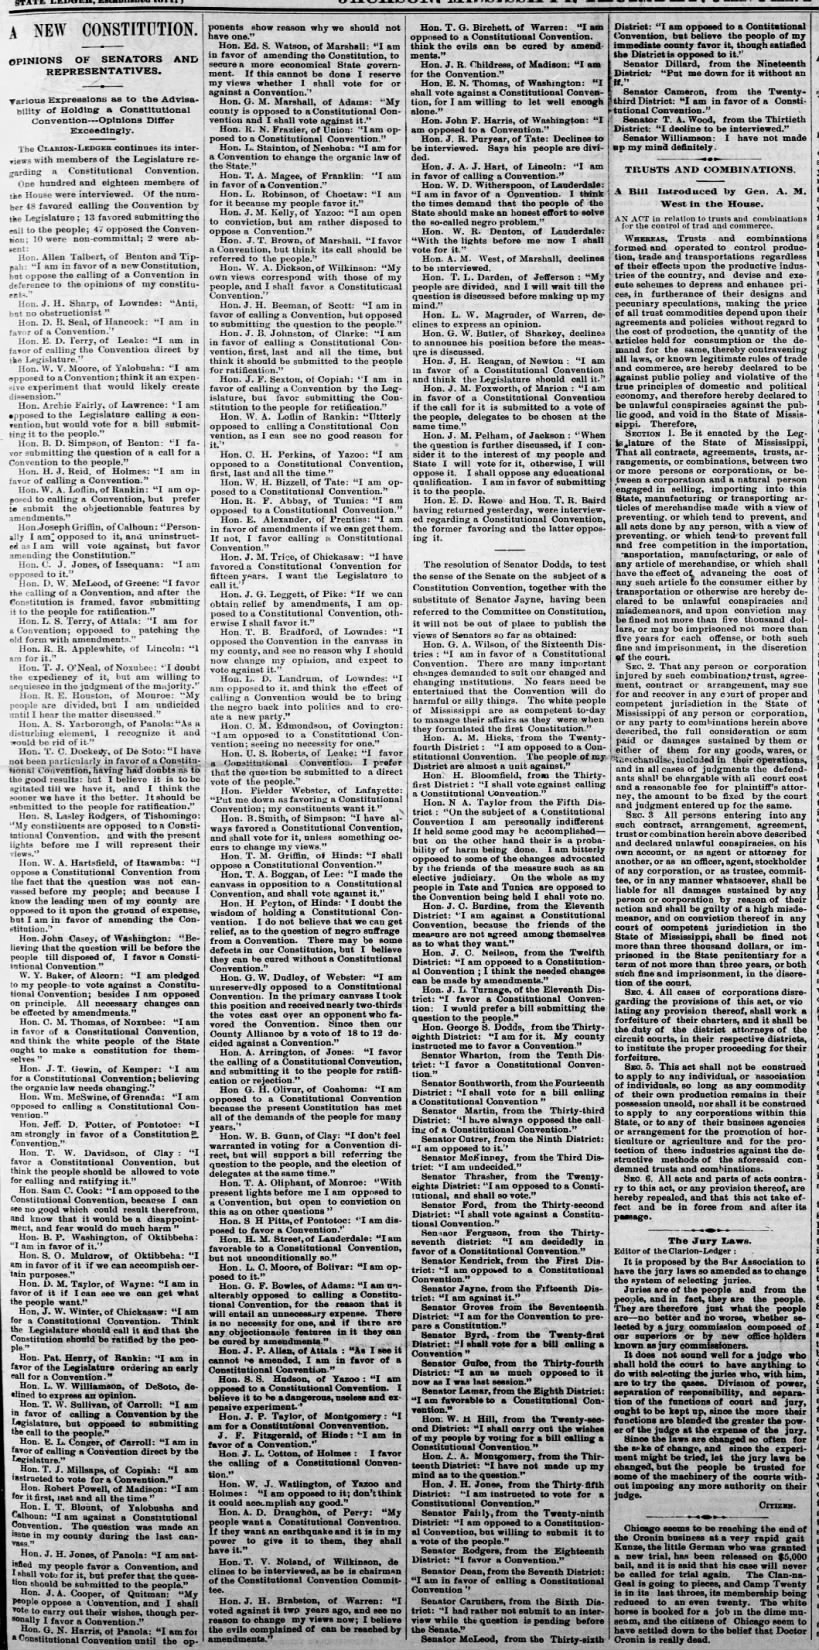 New Constitution, The Clarion Ledger, (Jackson, Mississippi) January 23, 1890, page 1